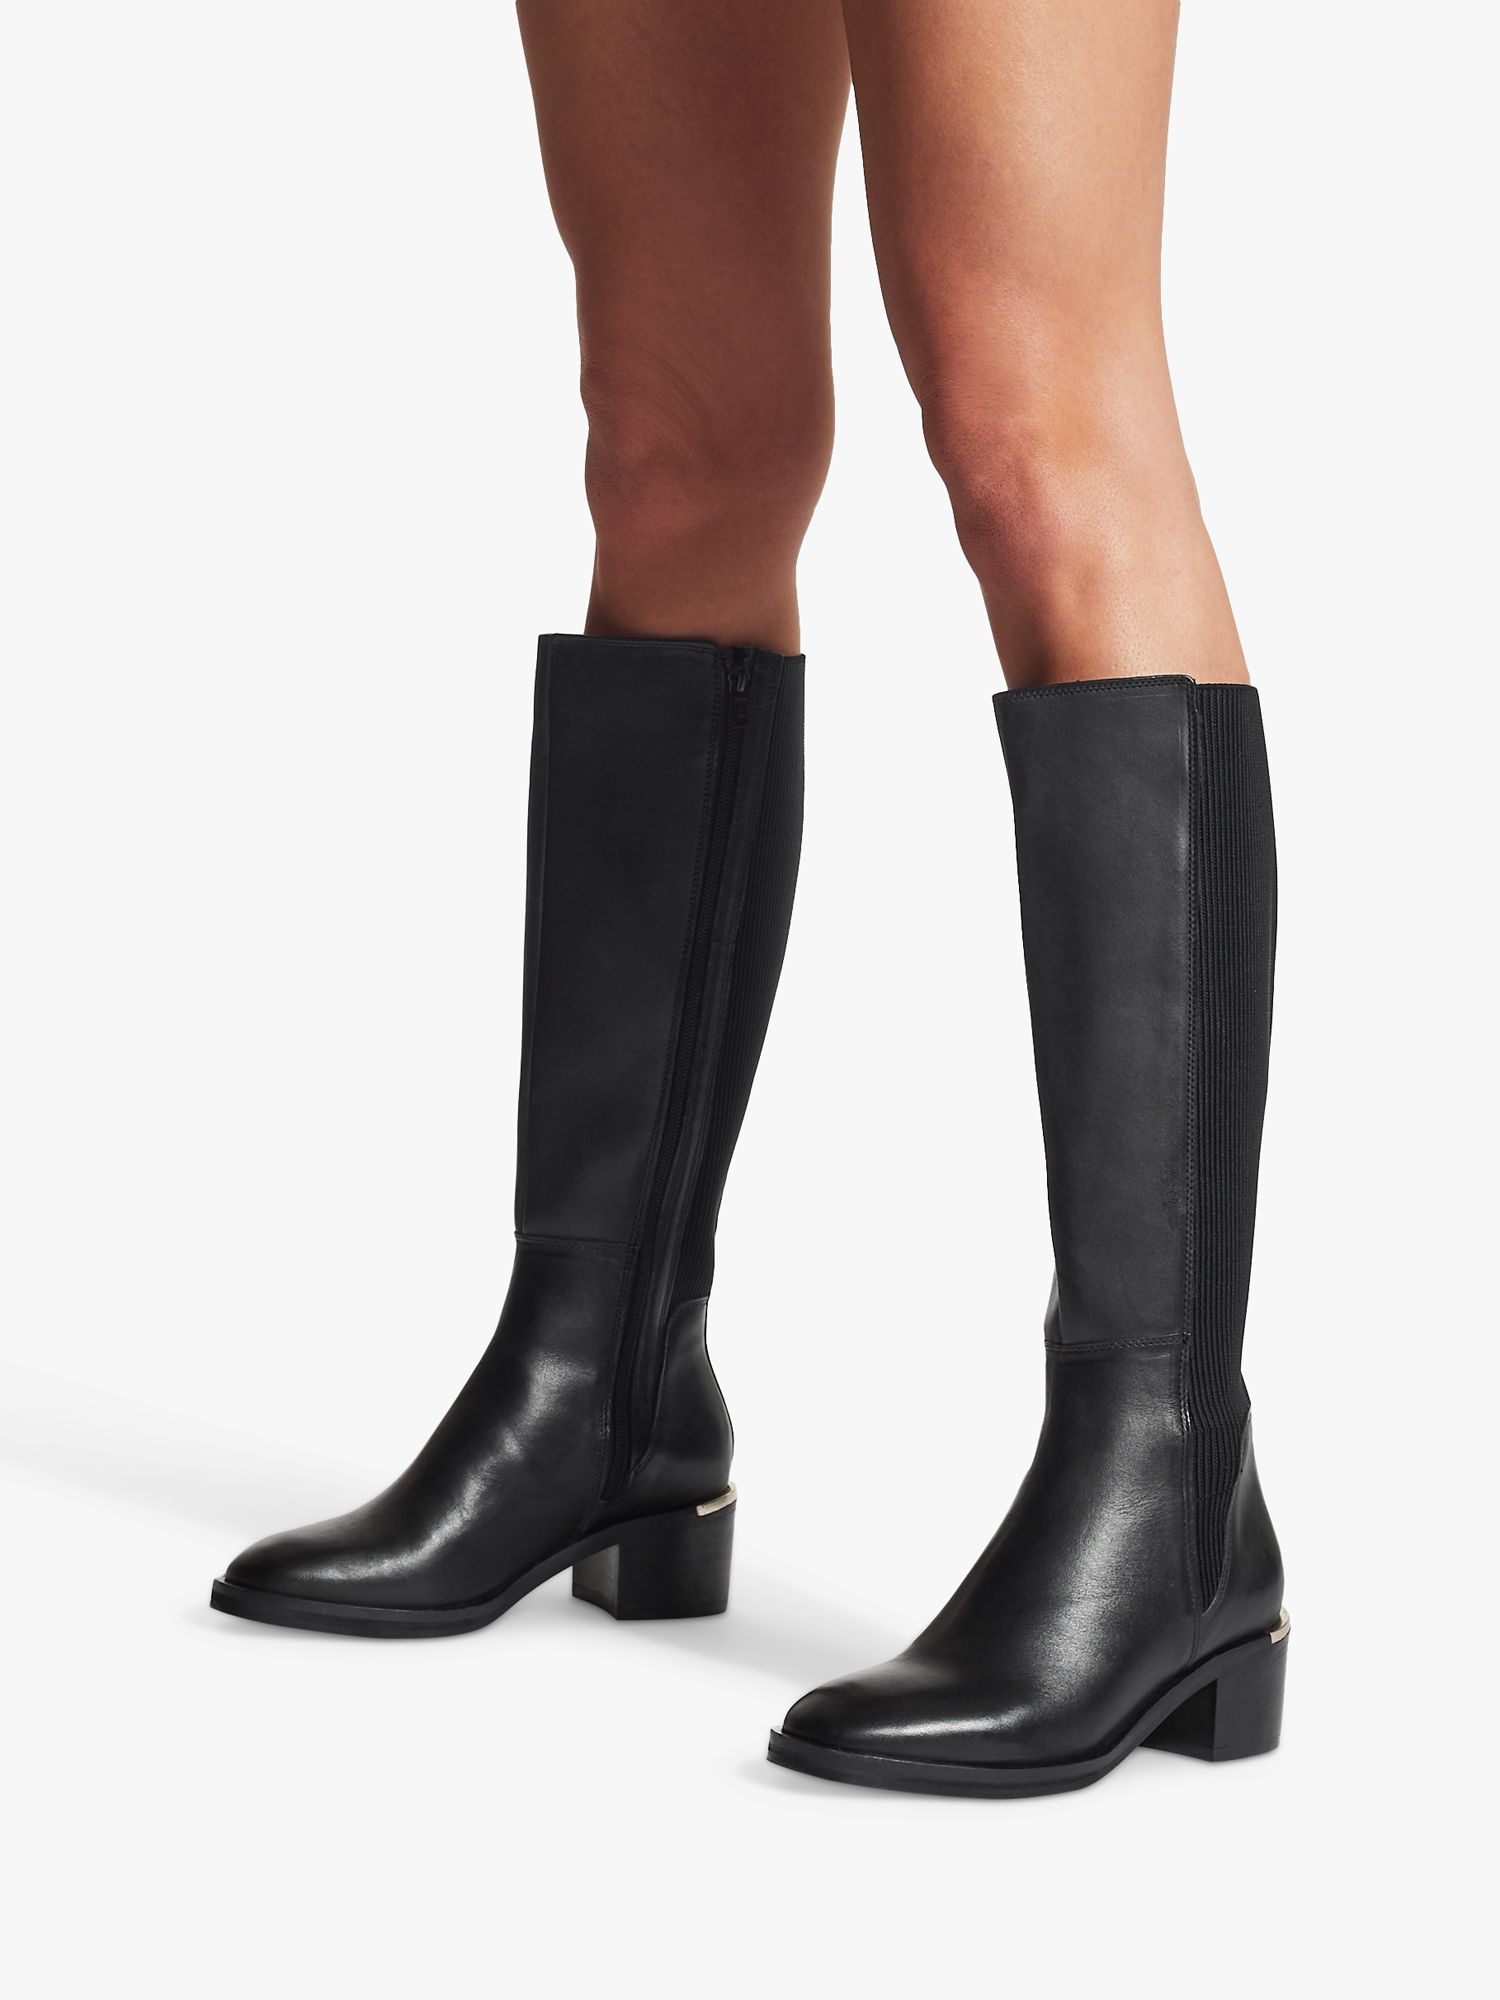 LEATHER KNEE HIGH BOOTS - Black